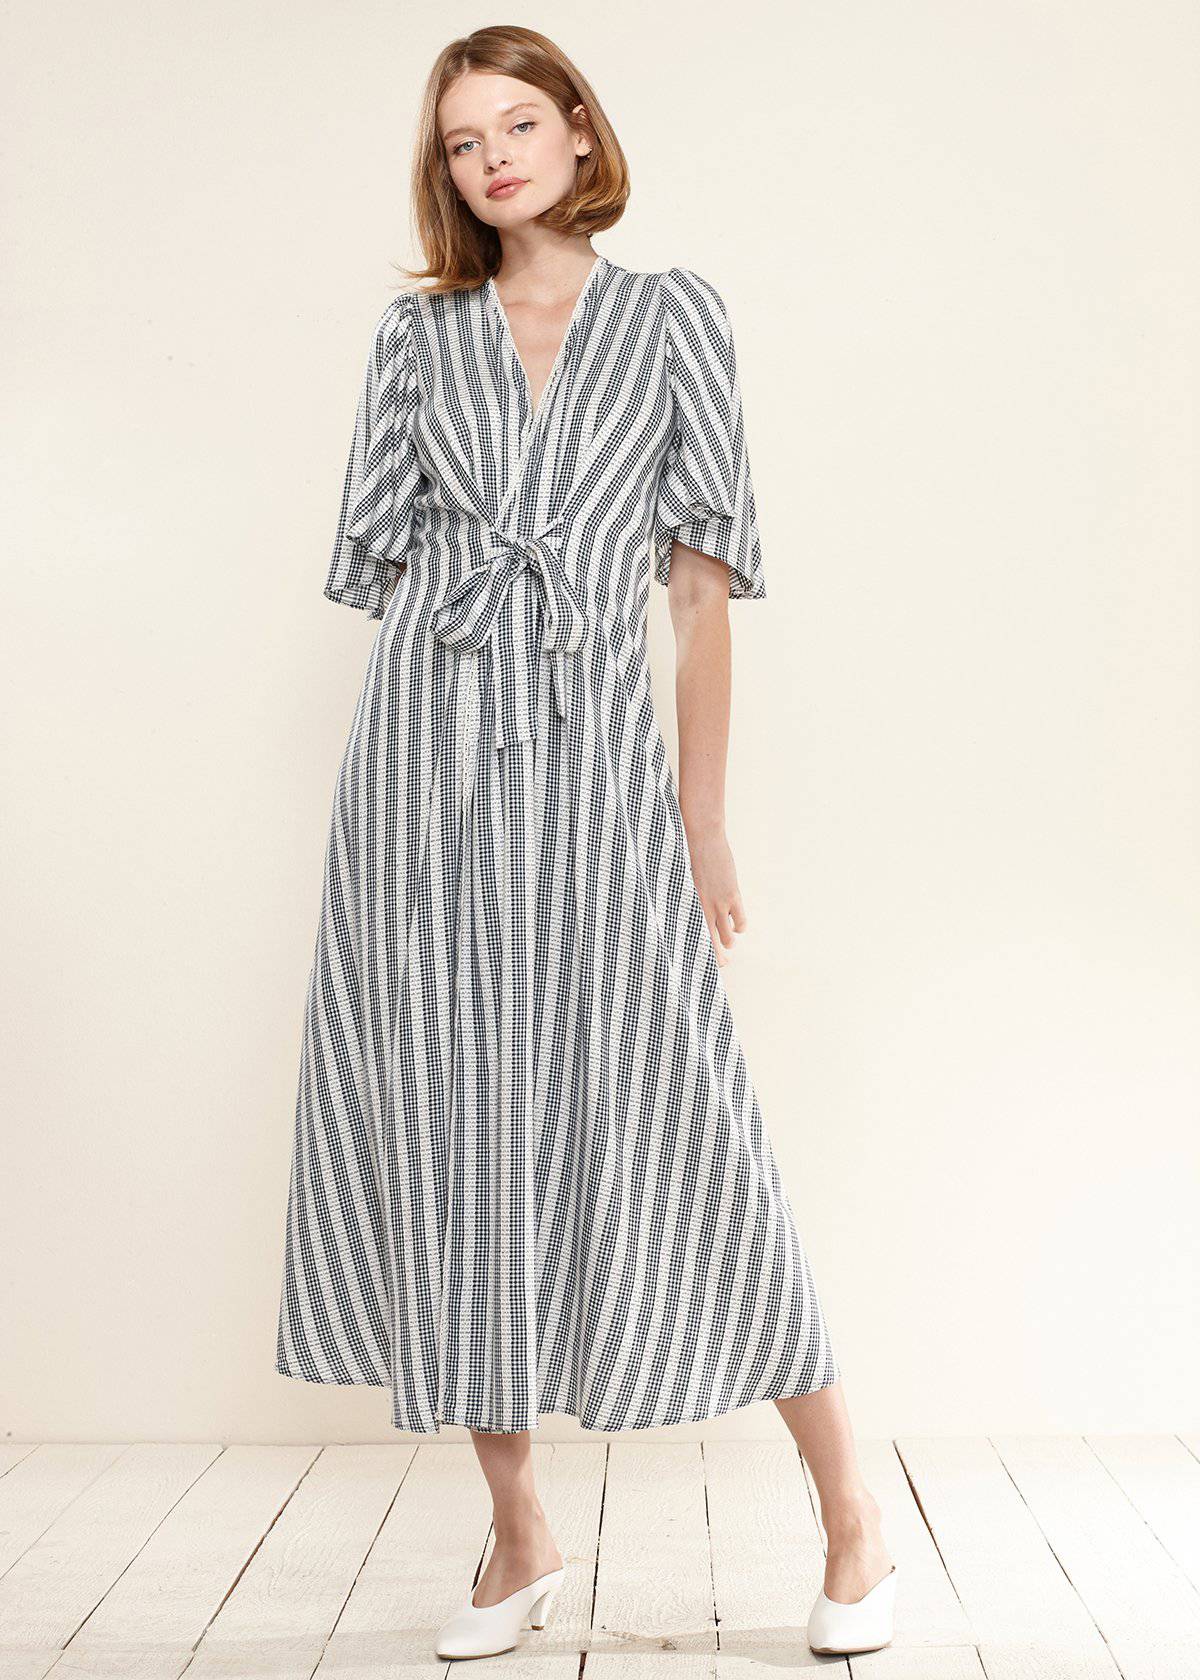 Buy Lace Trim Tie Front Maxi Dress in Ditsy Gingham by Shop at Konus